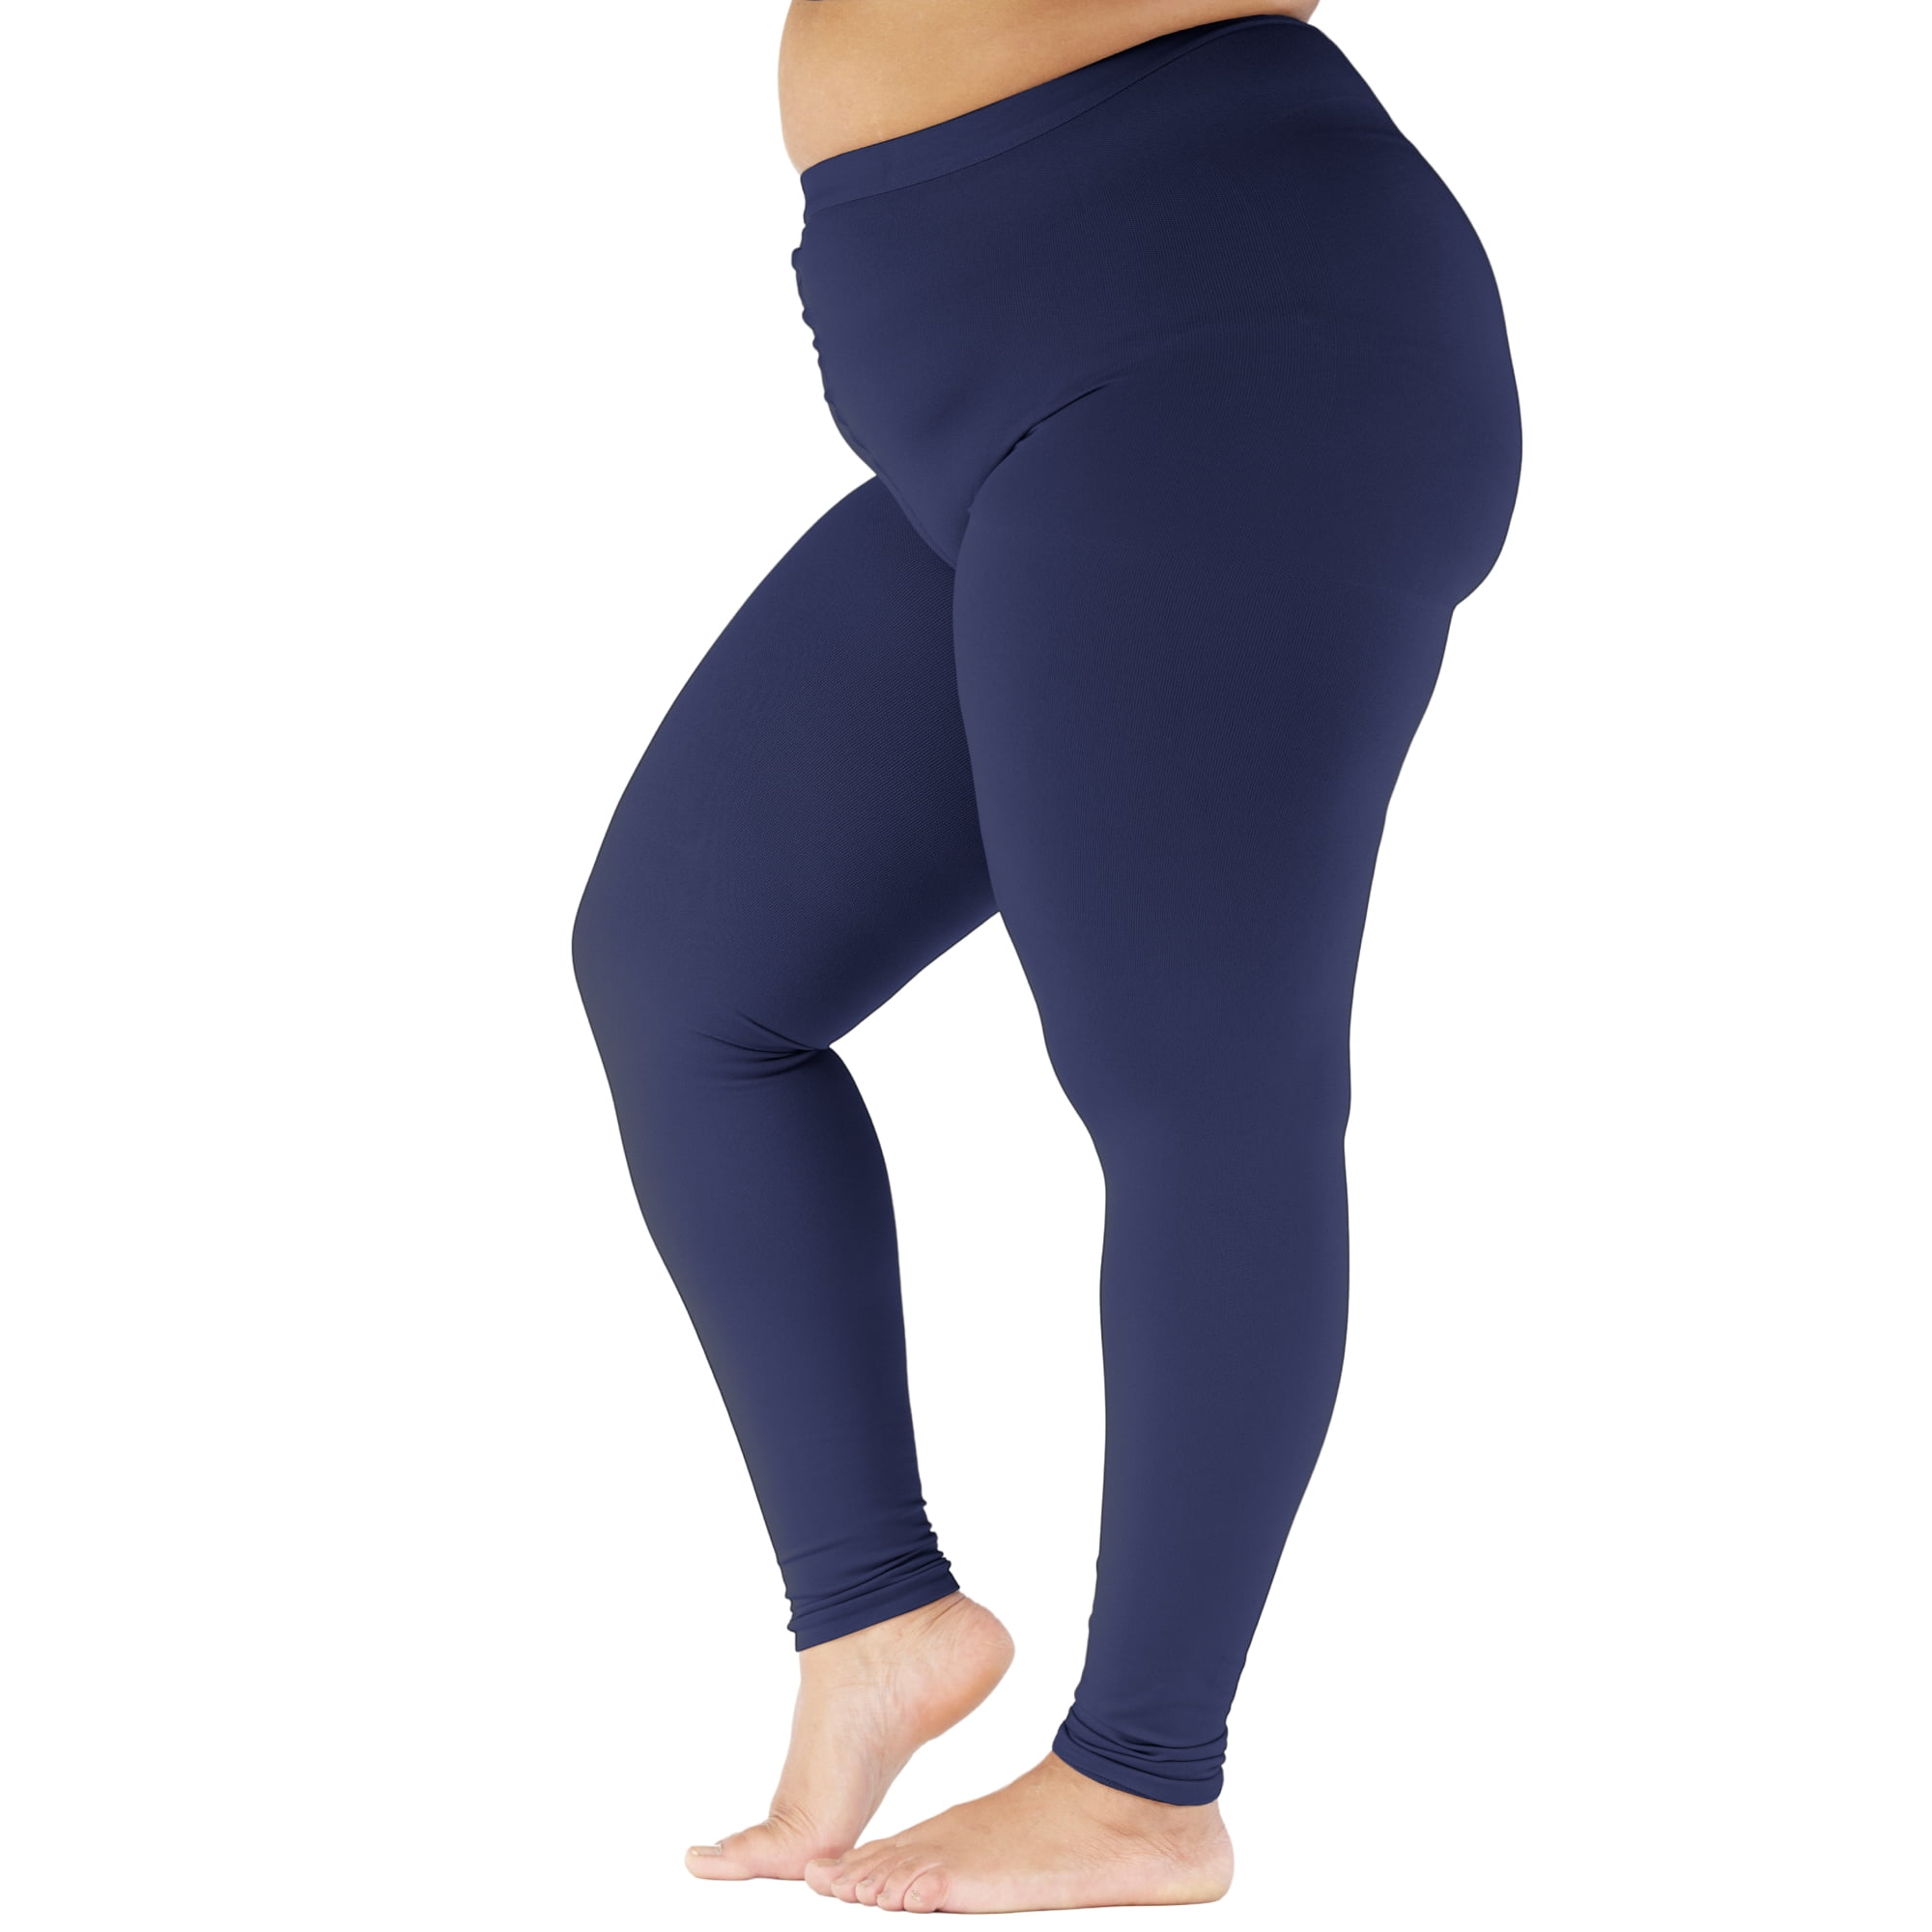 Compression Under Dress Leggings for Women Up to 7XL 20-30mmHg - A717